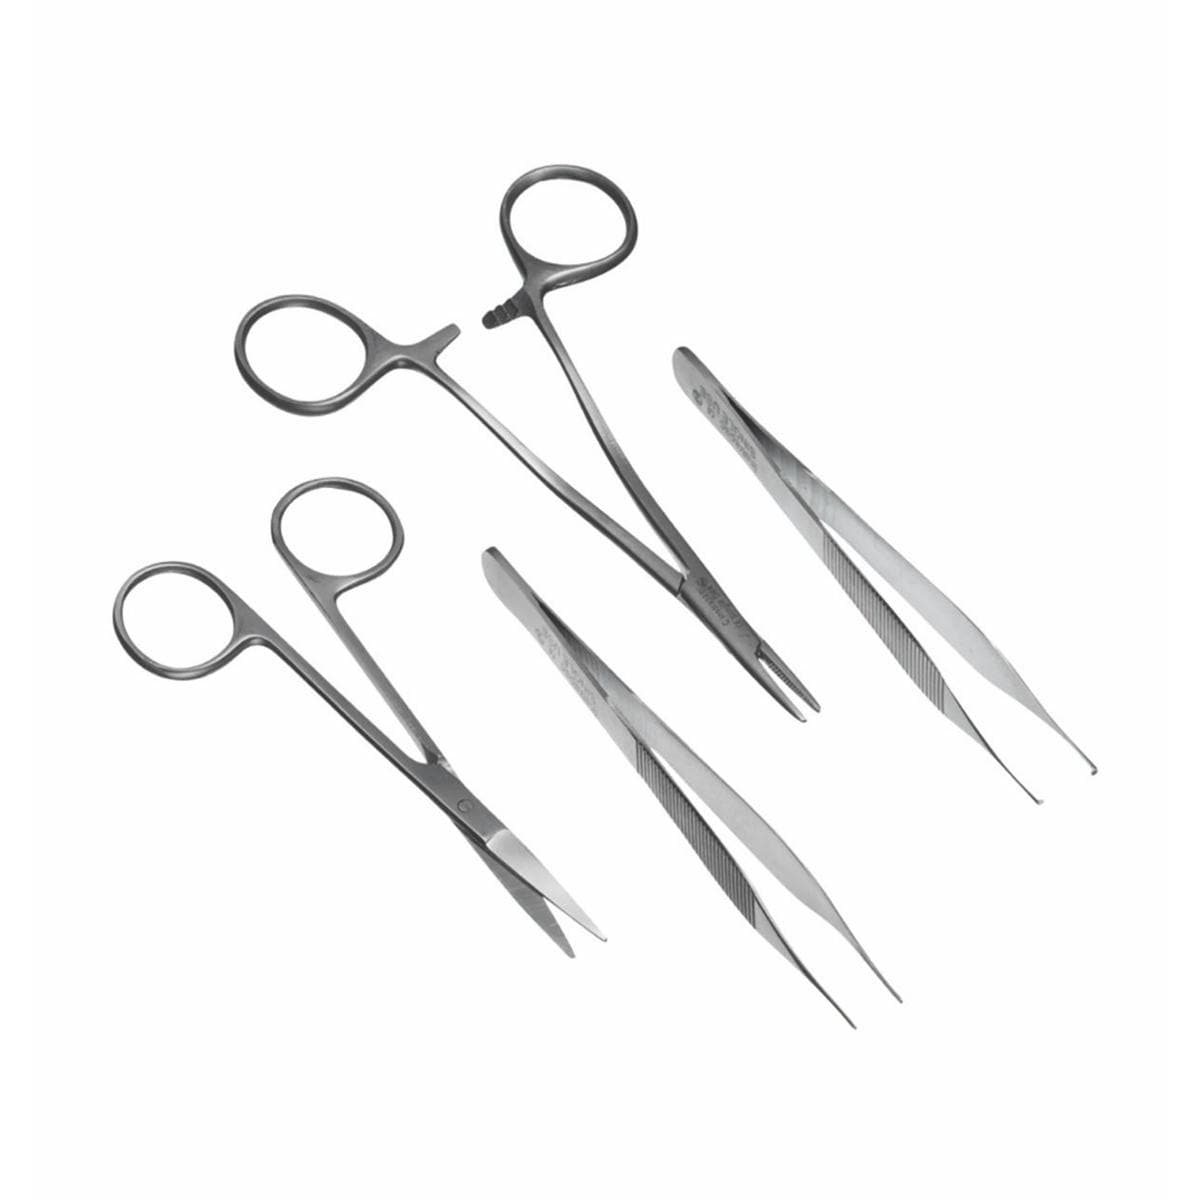 Instrapac Adsons Suture Pack Sterile SU